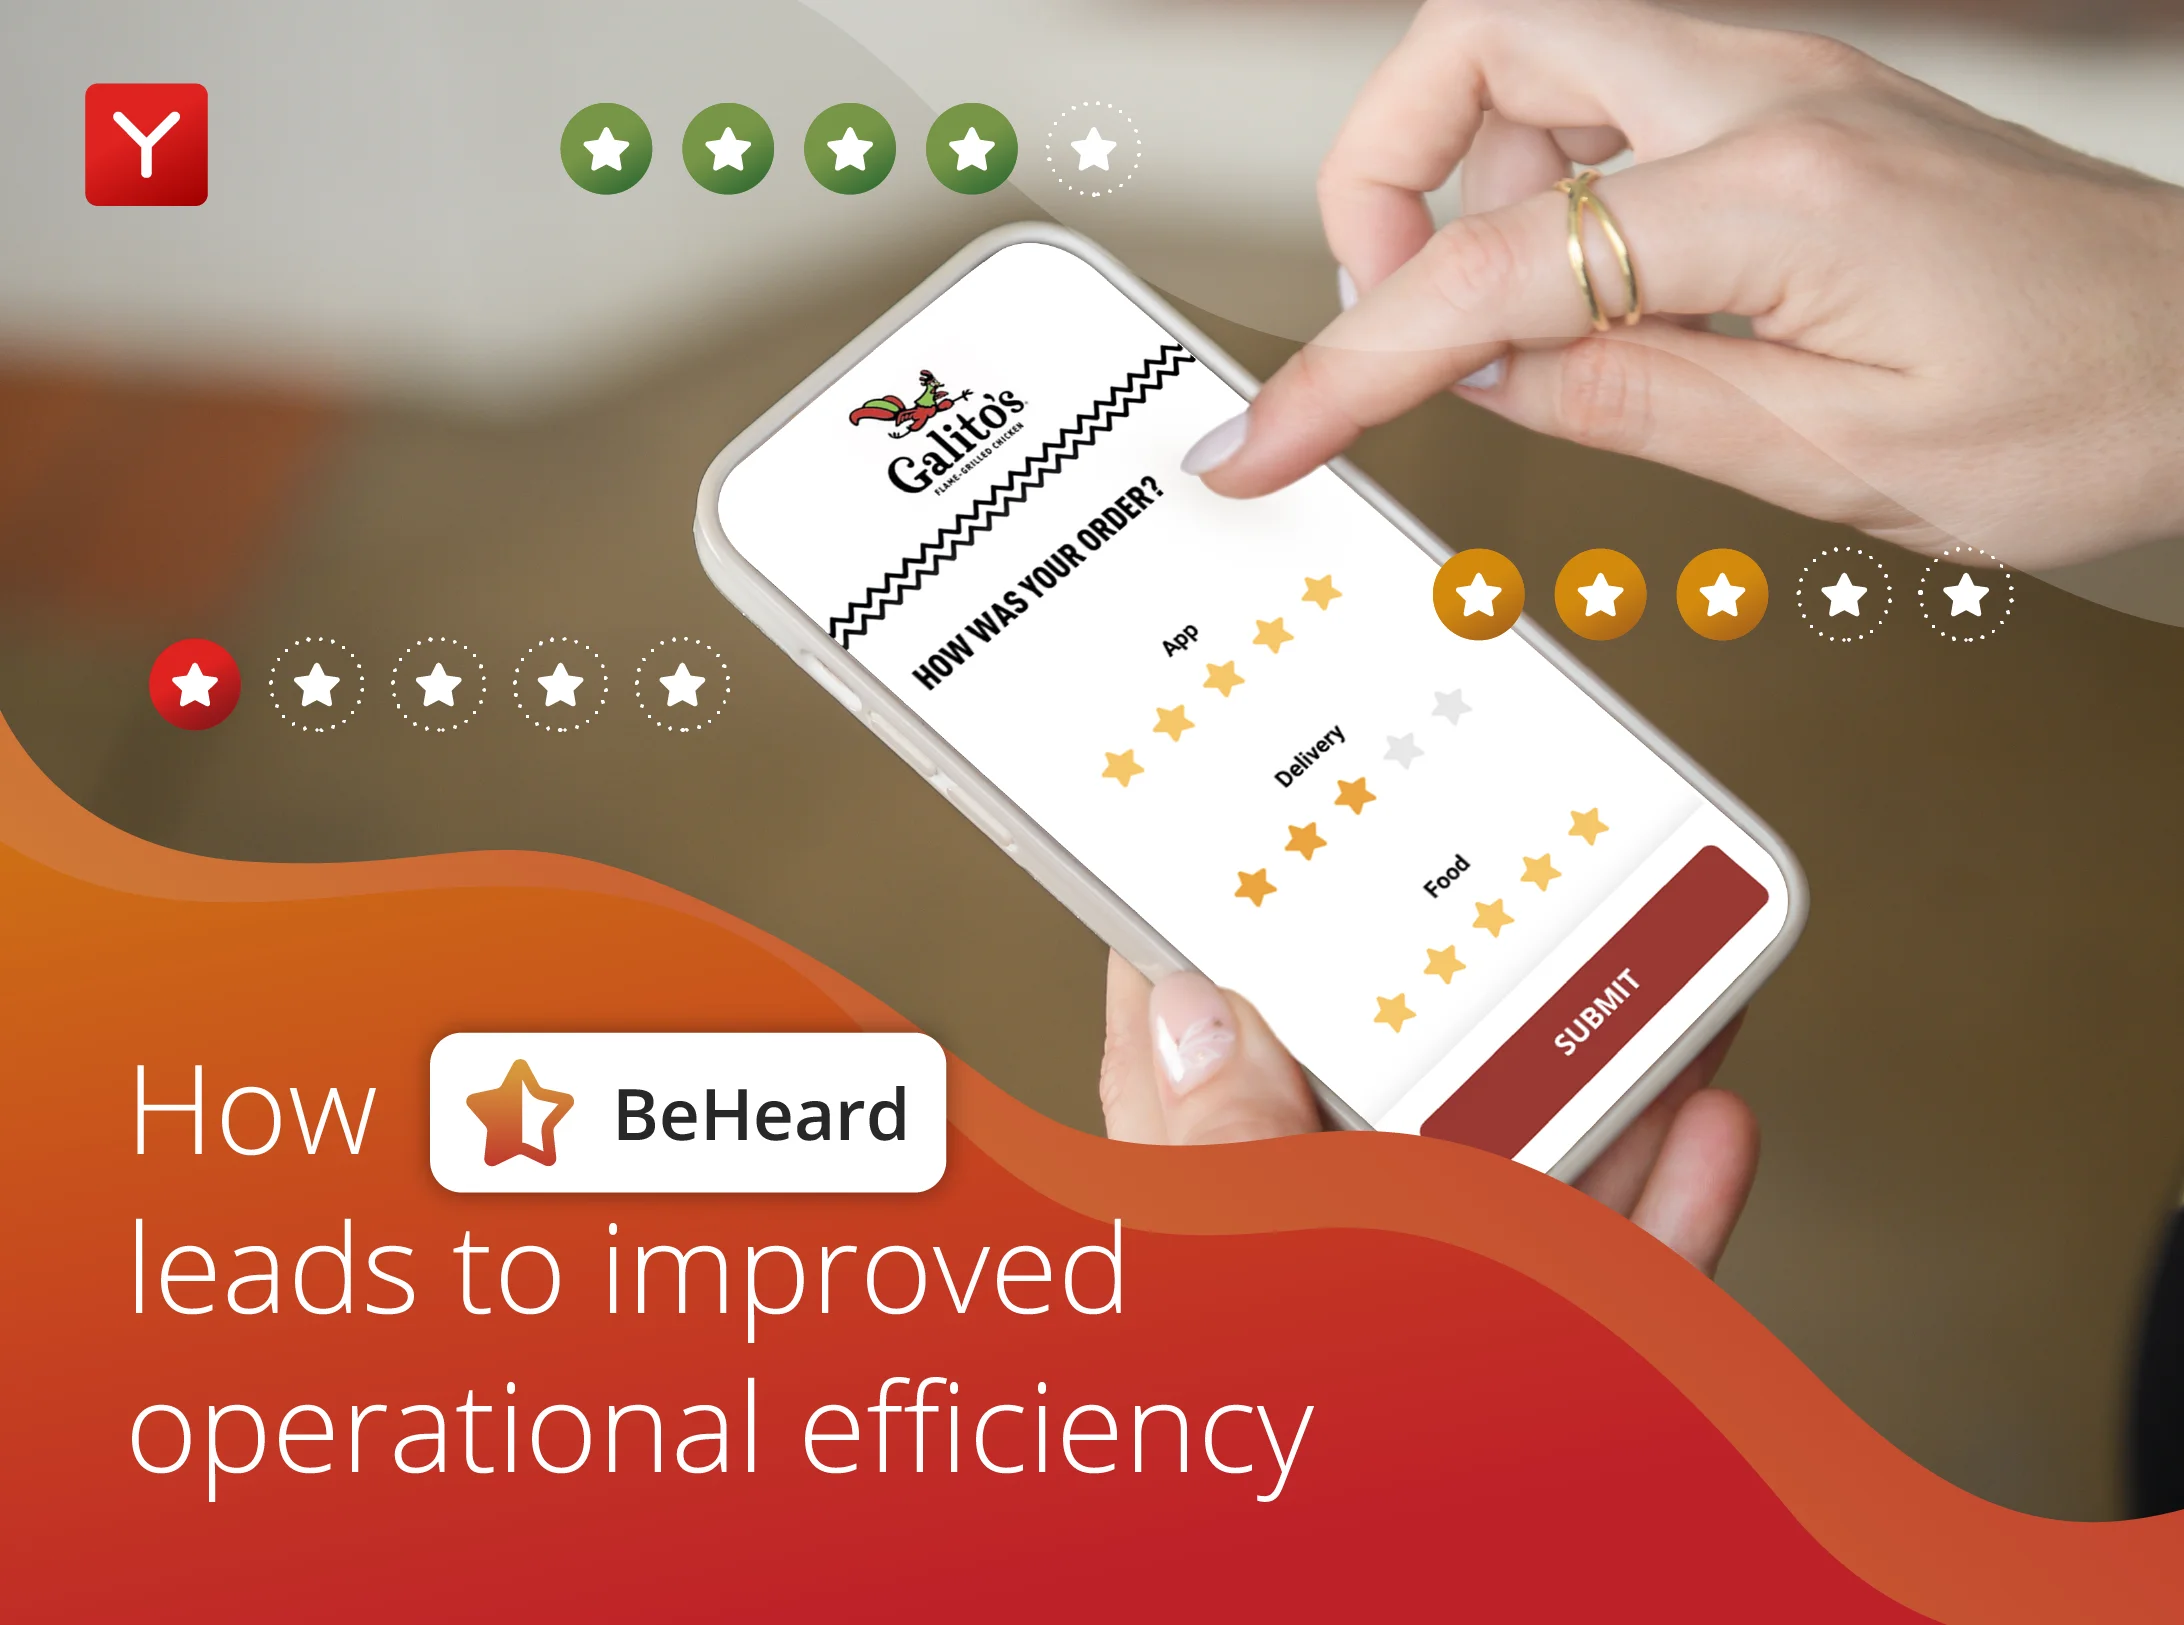 How BeHeard leads to improved operational efficiency